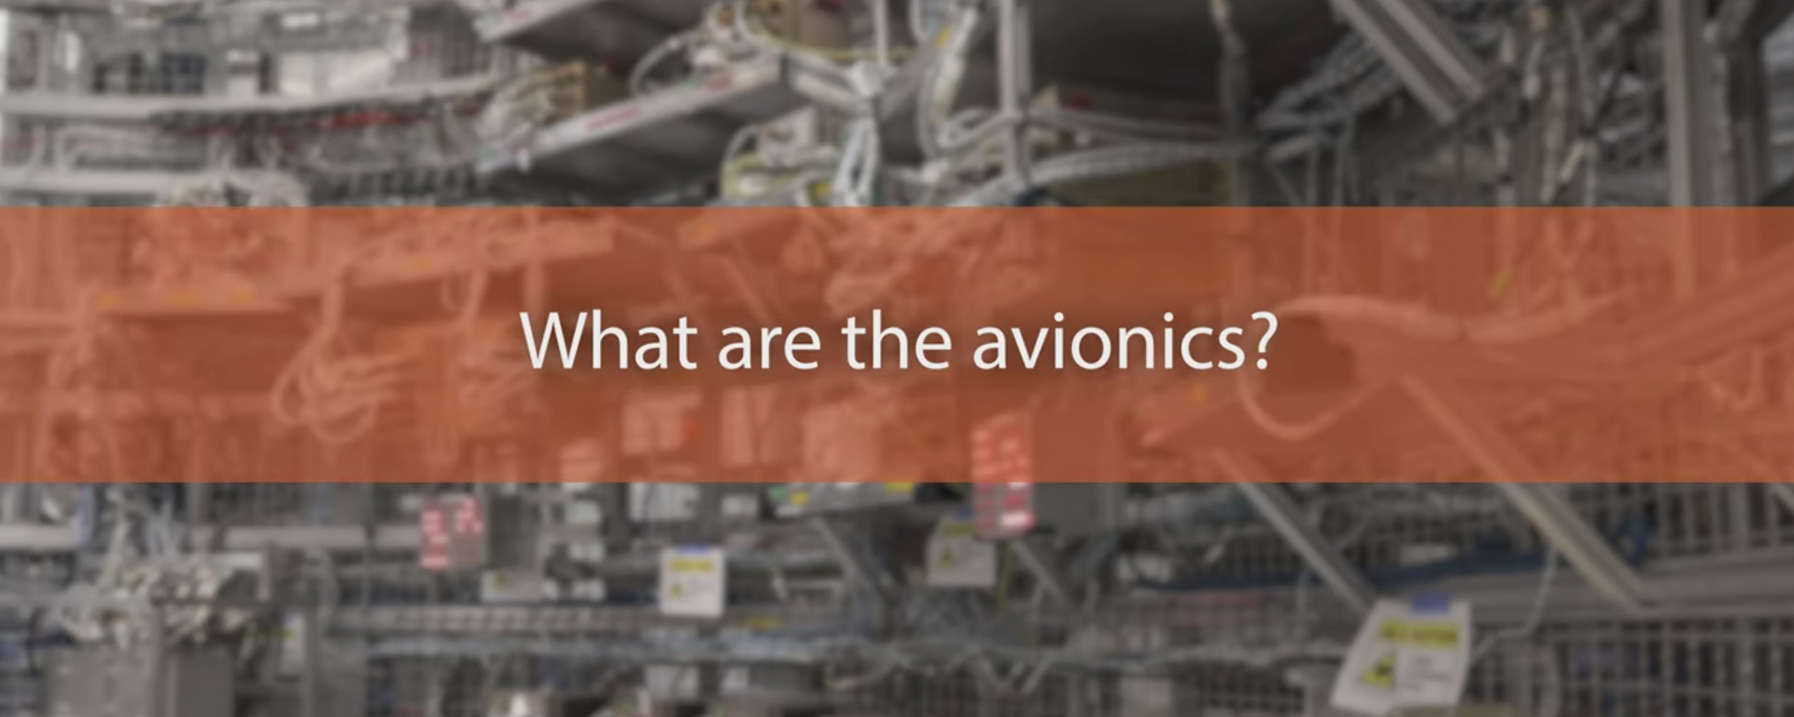 What are the avionics?